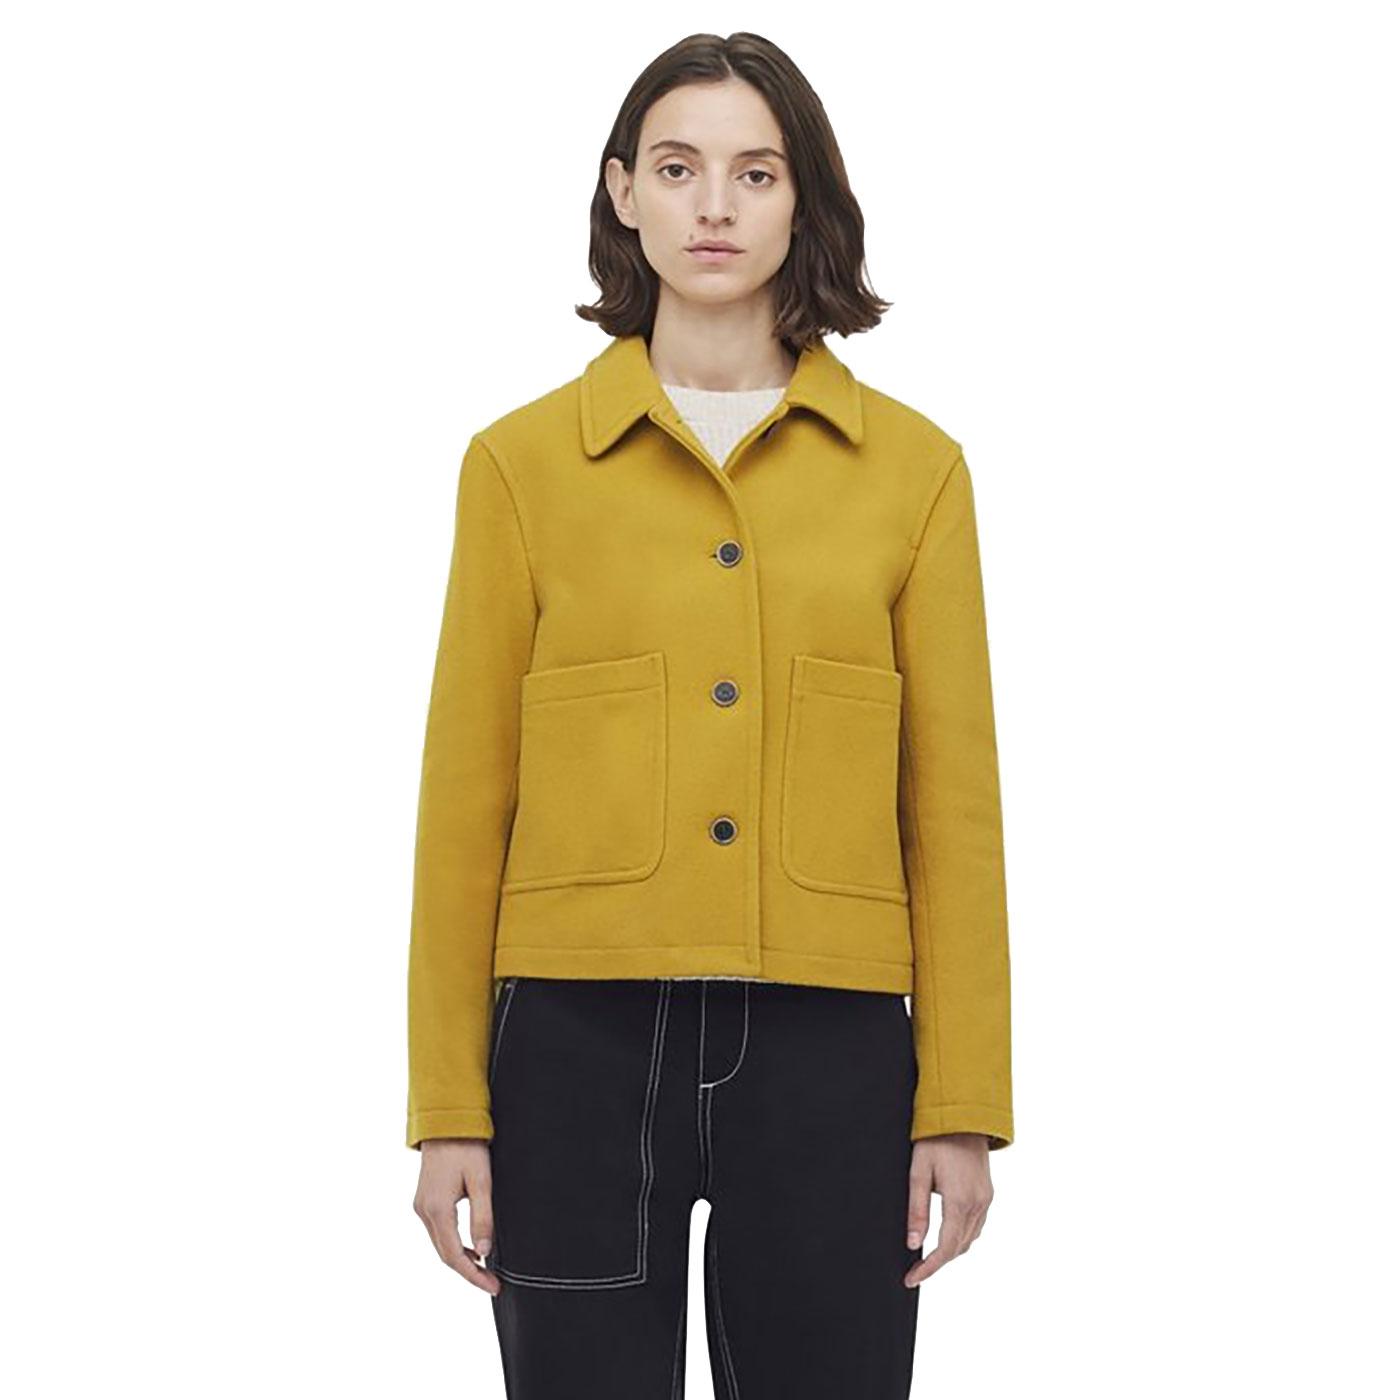 https://aws.atomretro.com/products/1400/gloverall-daisy-cropped-jkt-yellow-011.jpg